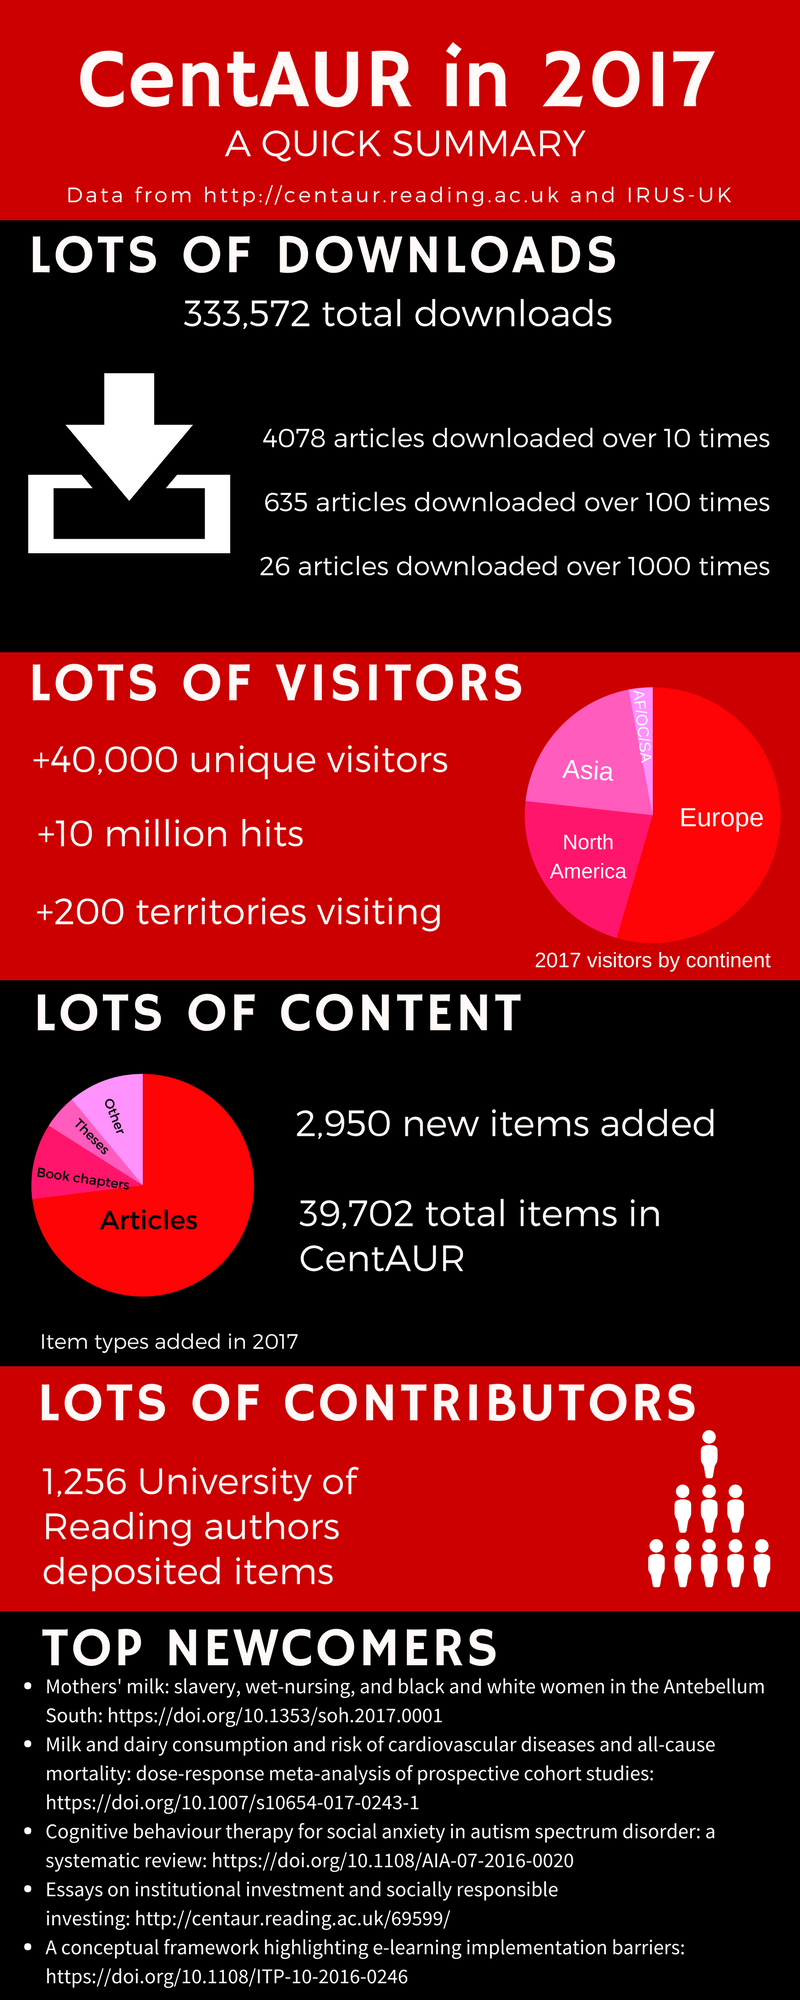 Infographic with key statistics from the CentAUR repository 